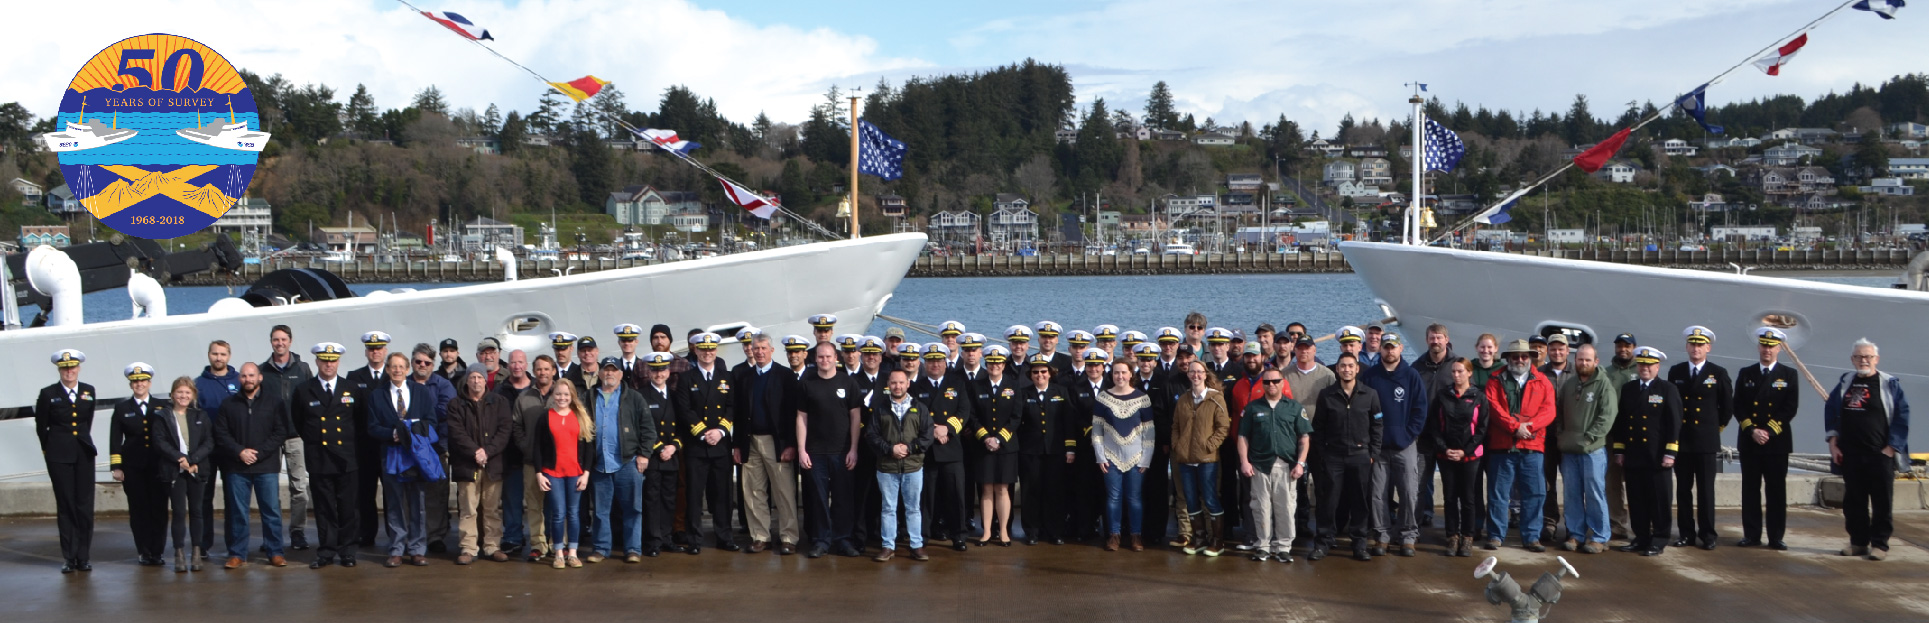 Past and present crew of NOAA ships Rainier and Fairweather.